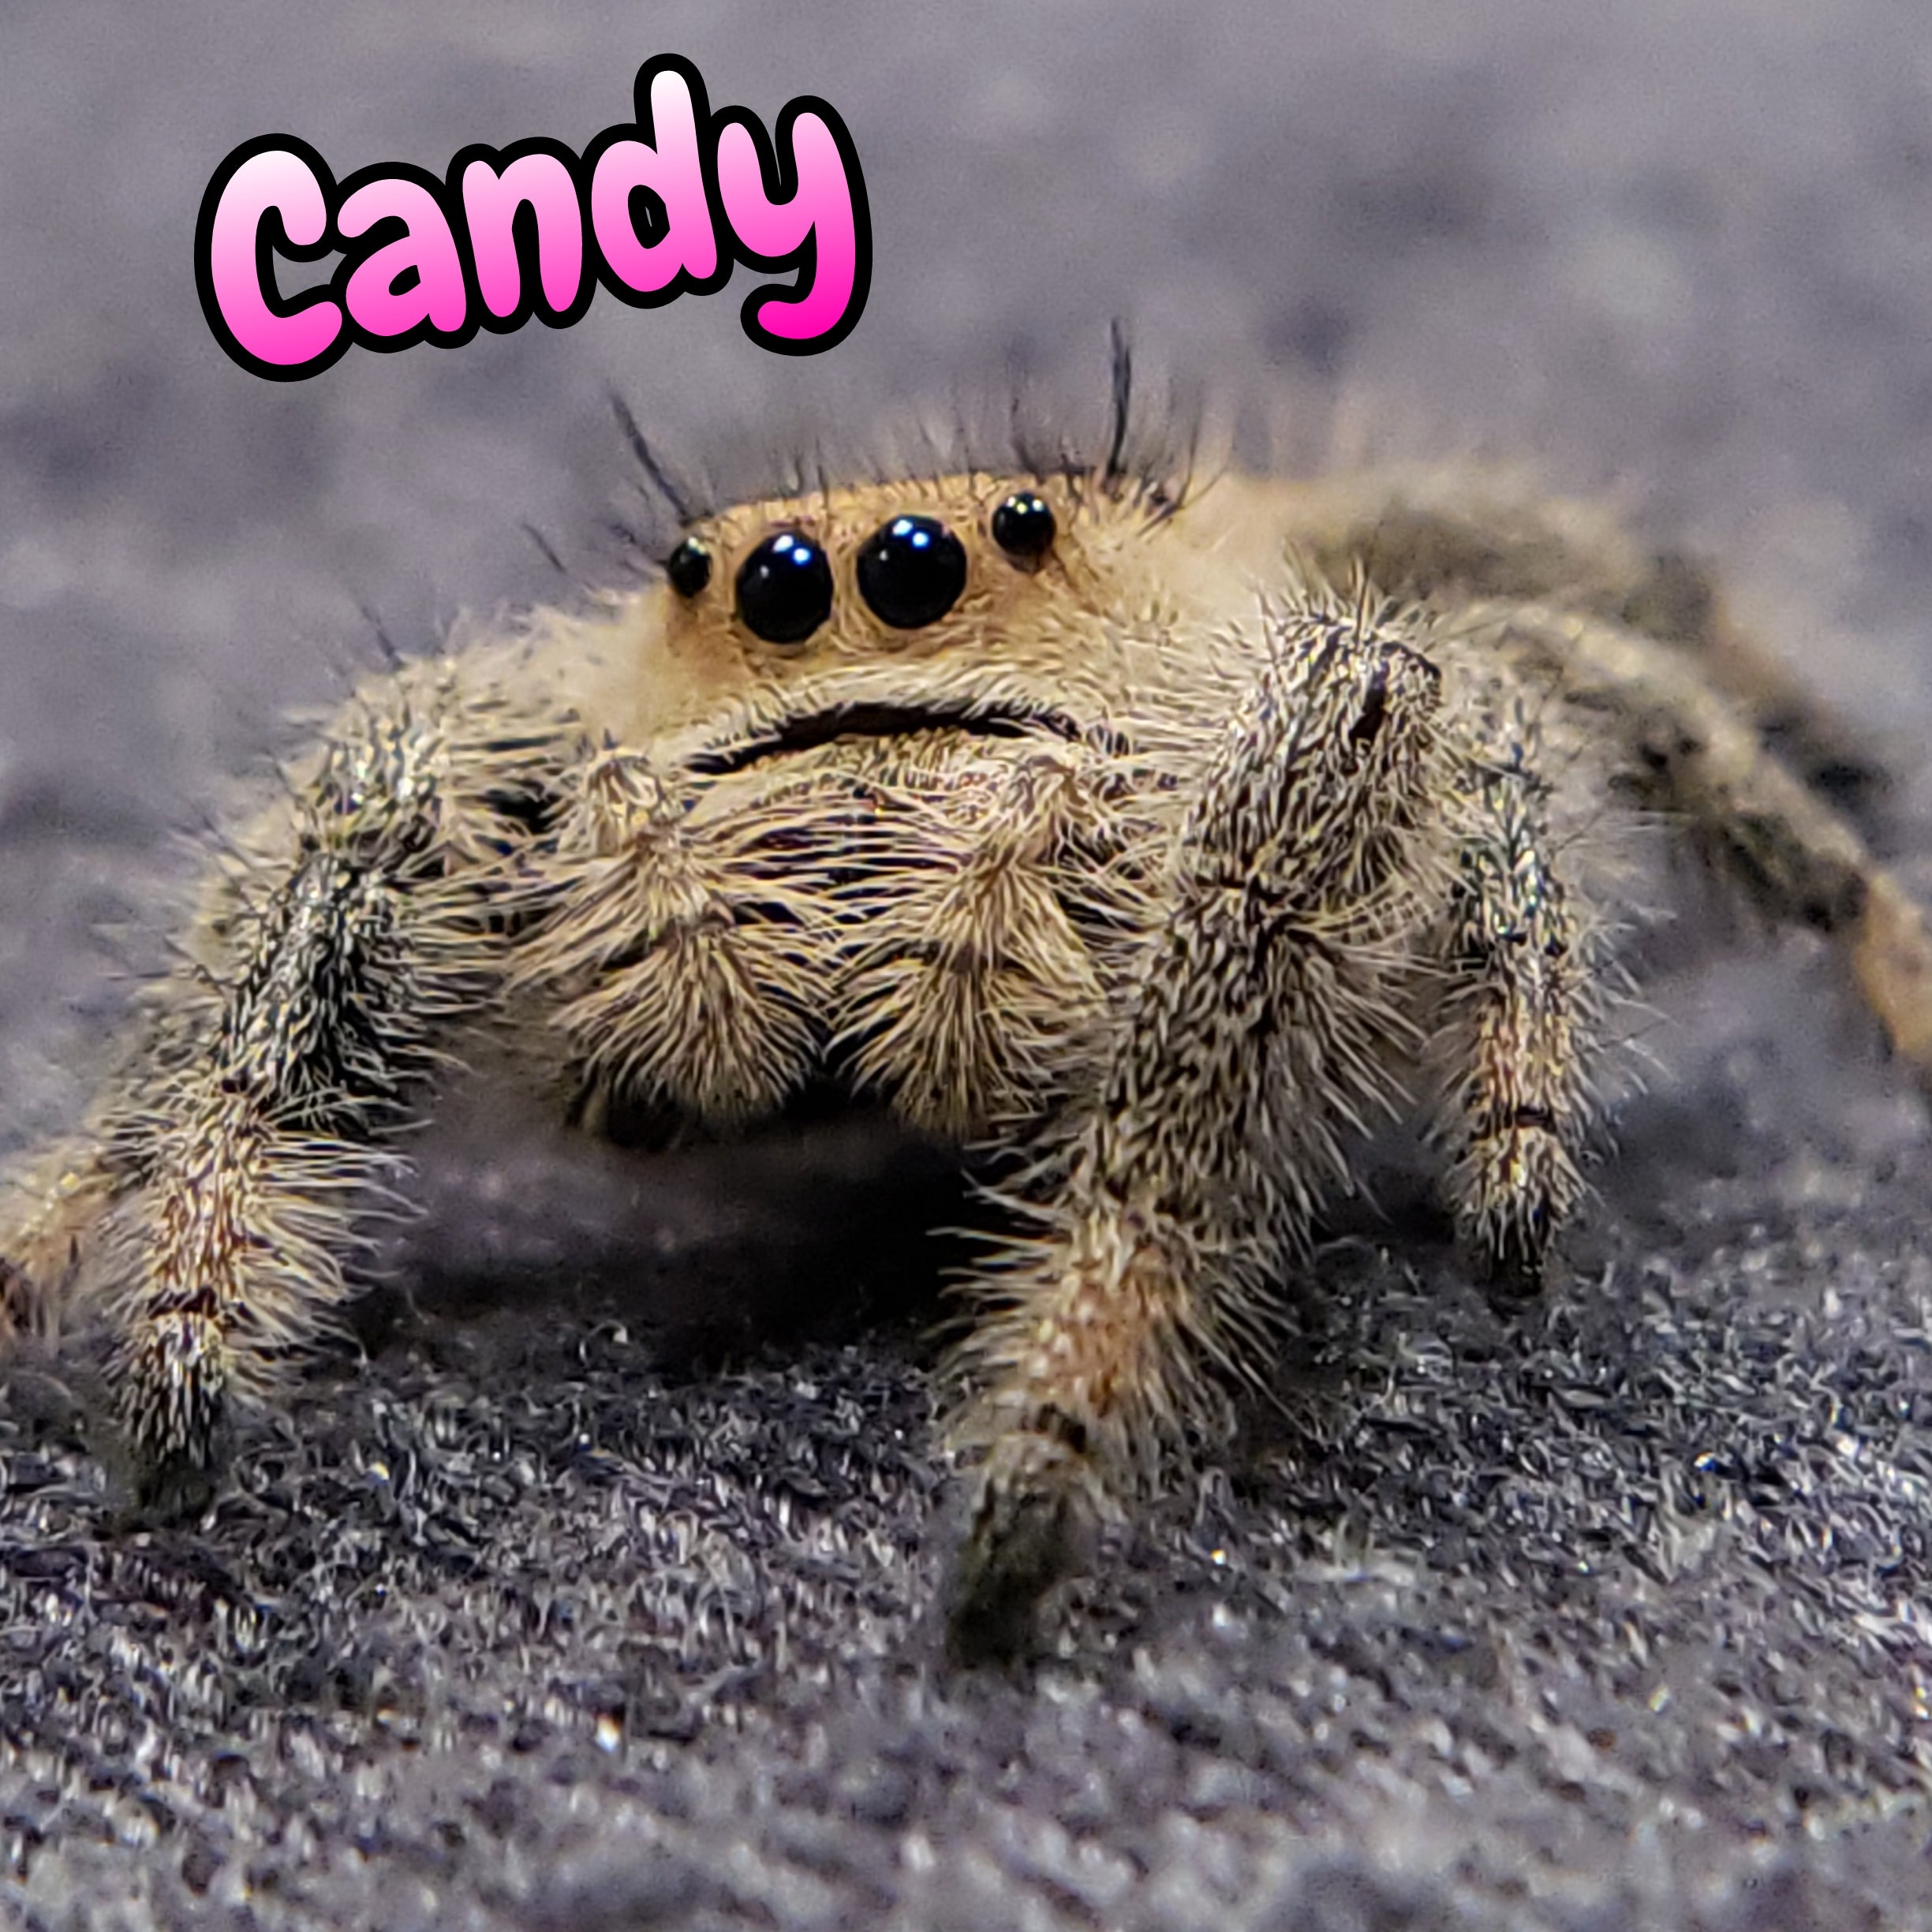 Regal Jumping Spider "Candy"